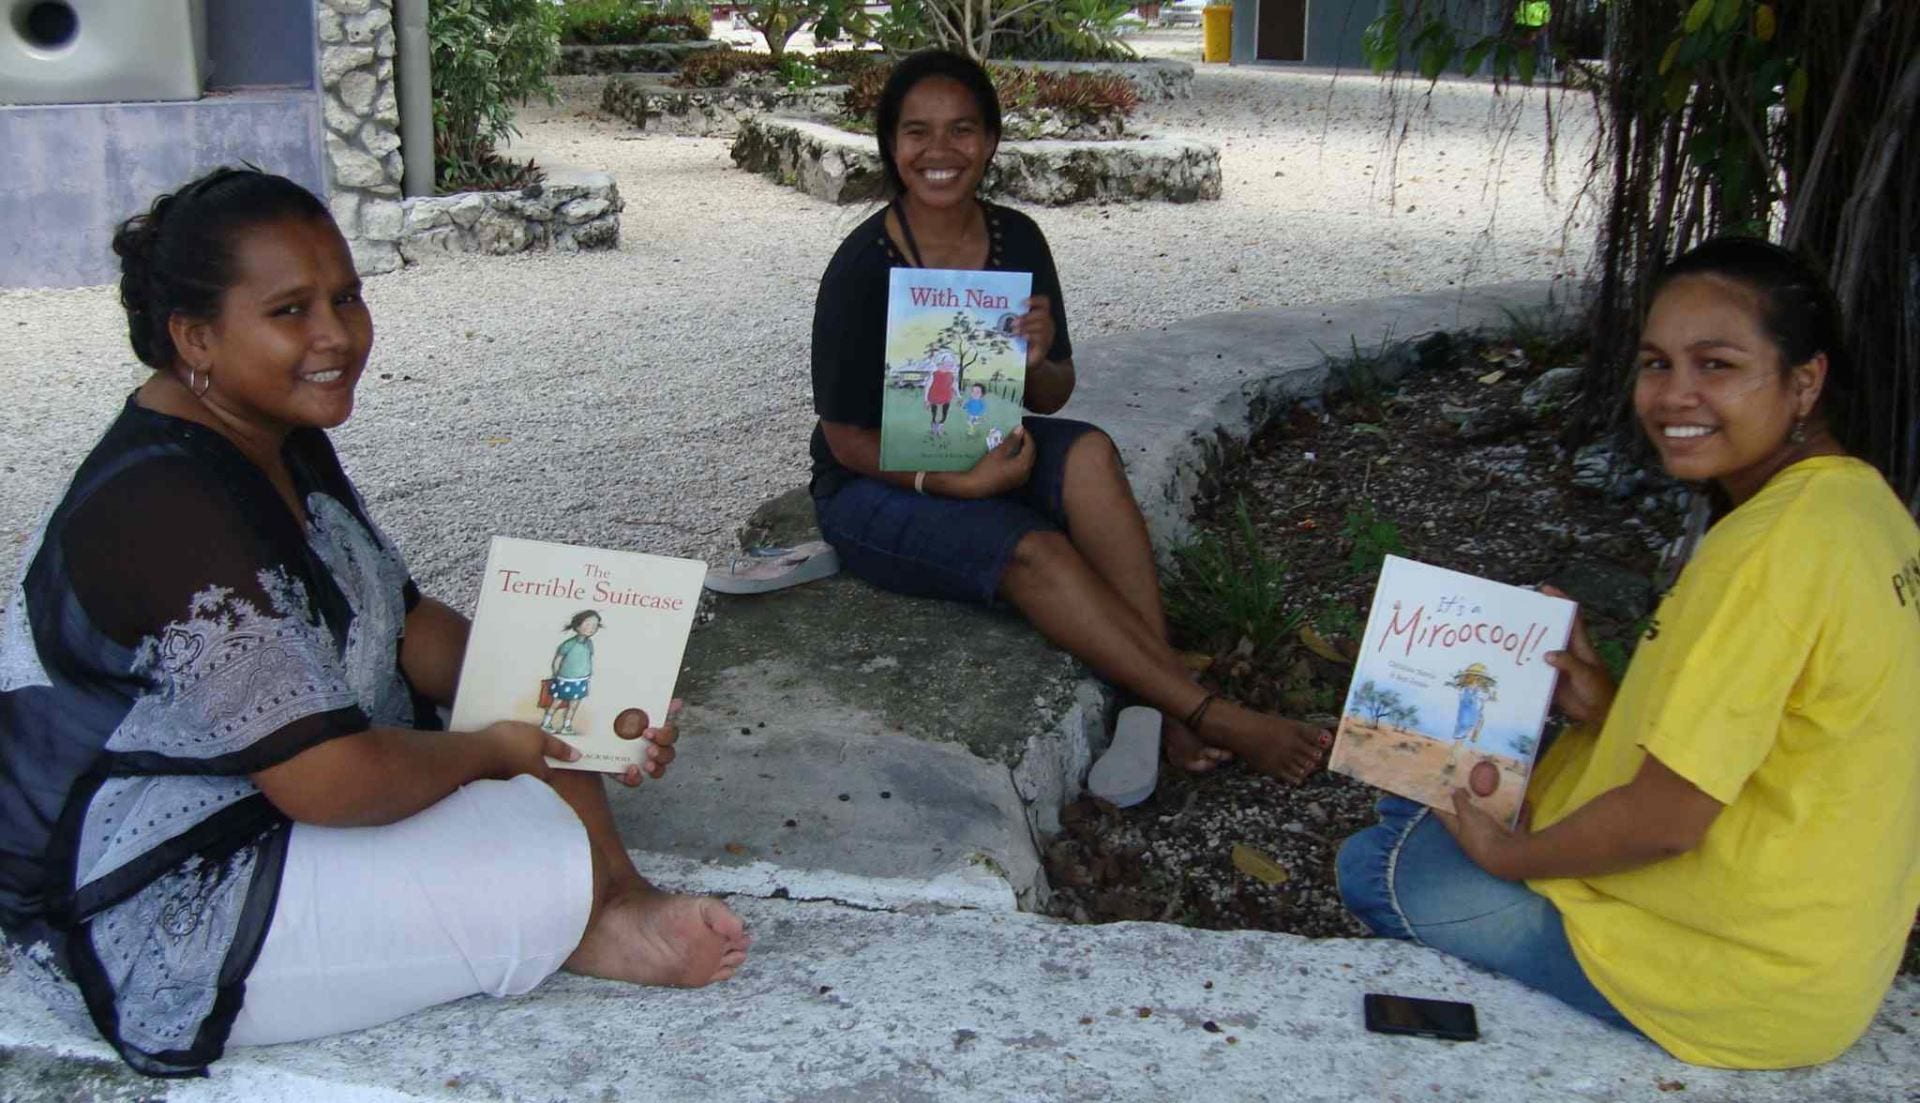 Three smiling Nauruan university students sit outdoors each holding a children's book in English